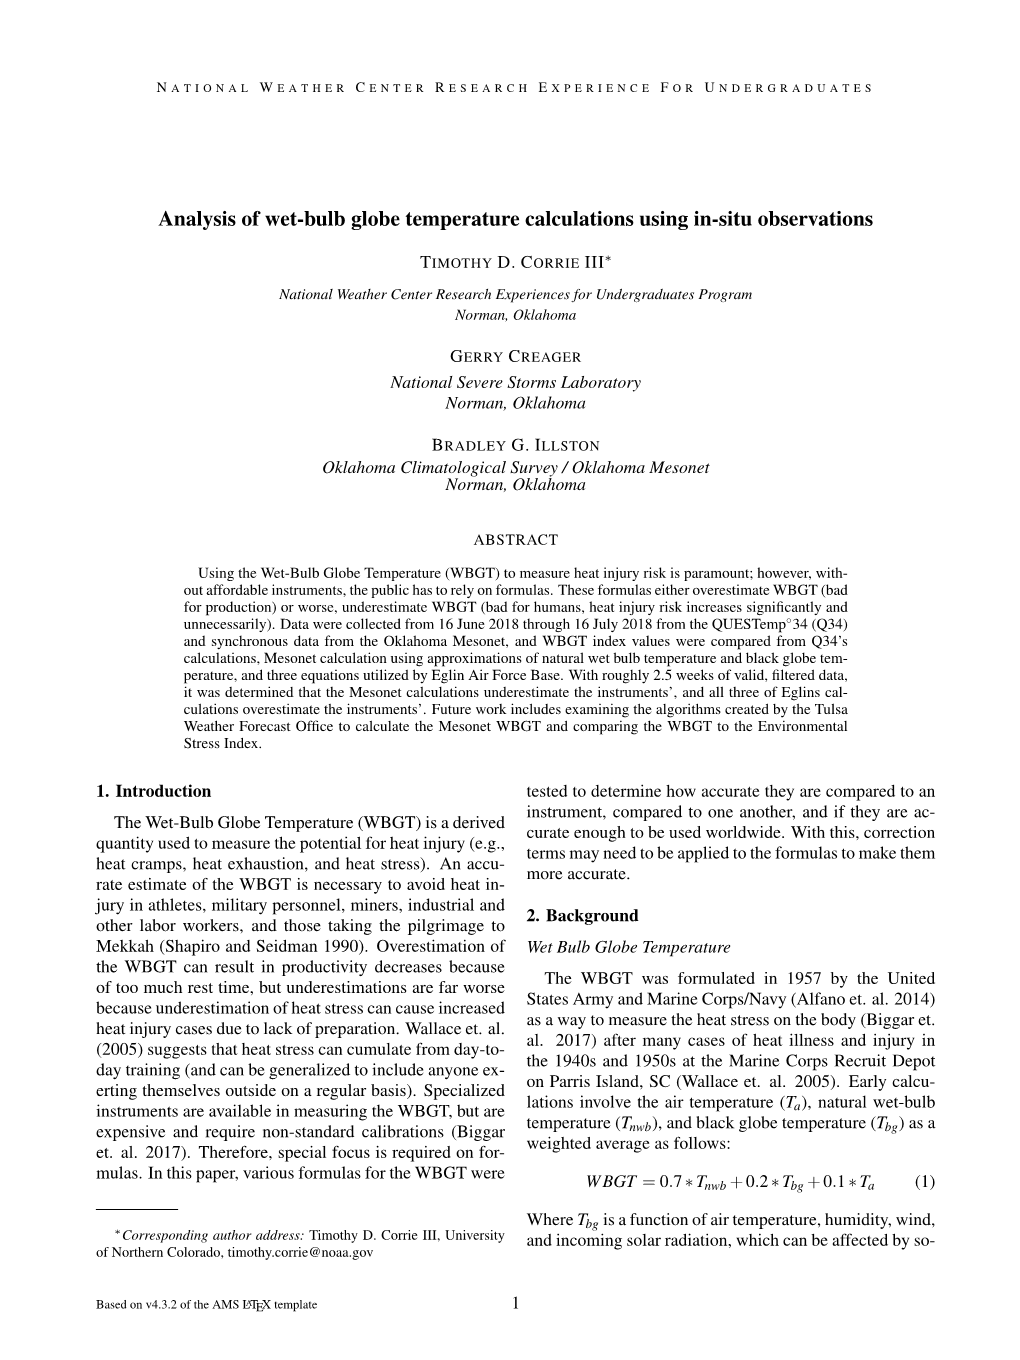 Analysis of Wet-Bulb Globe Temperature Calculations Using In-Situ Observations